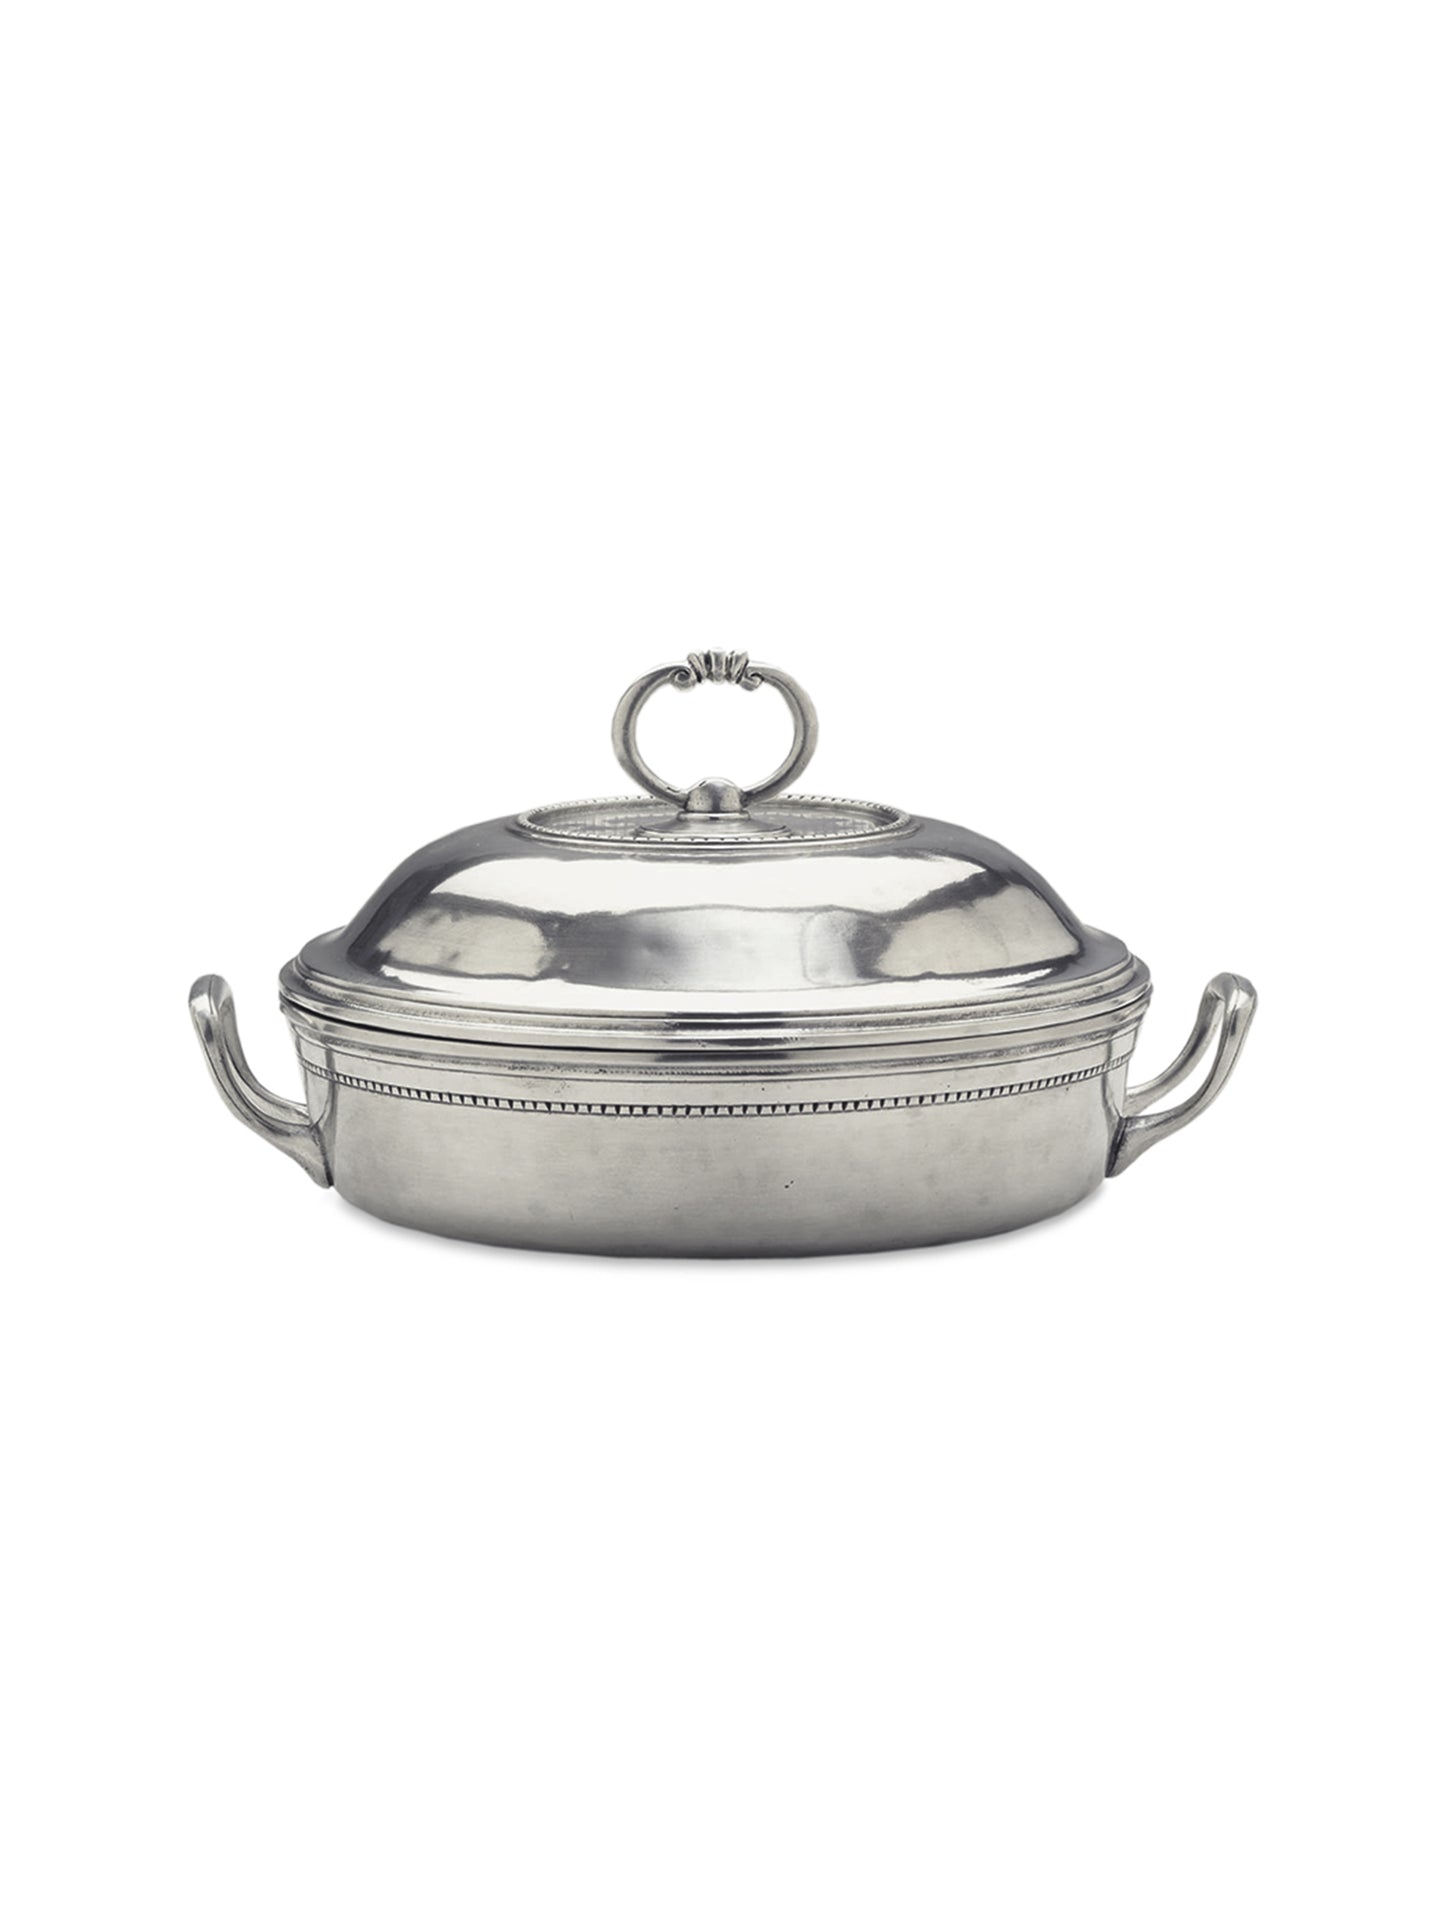 MATCH Pewter Toscana Round Pyrex Casserole Dish with Lid Weston Table